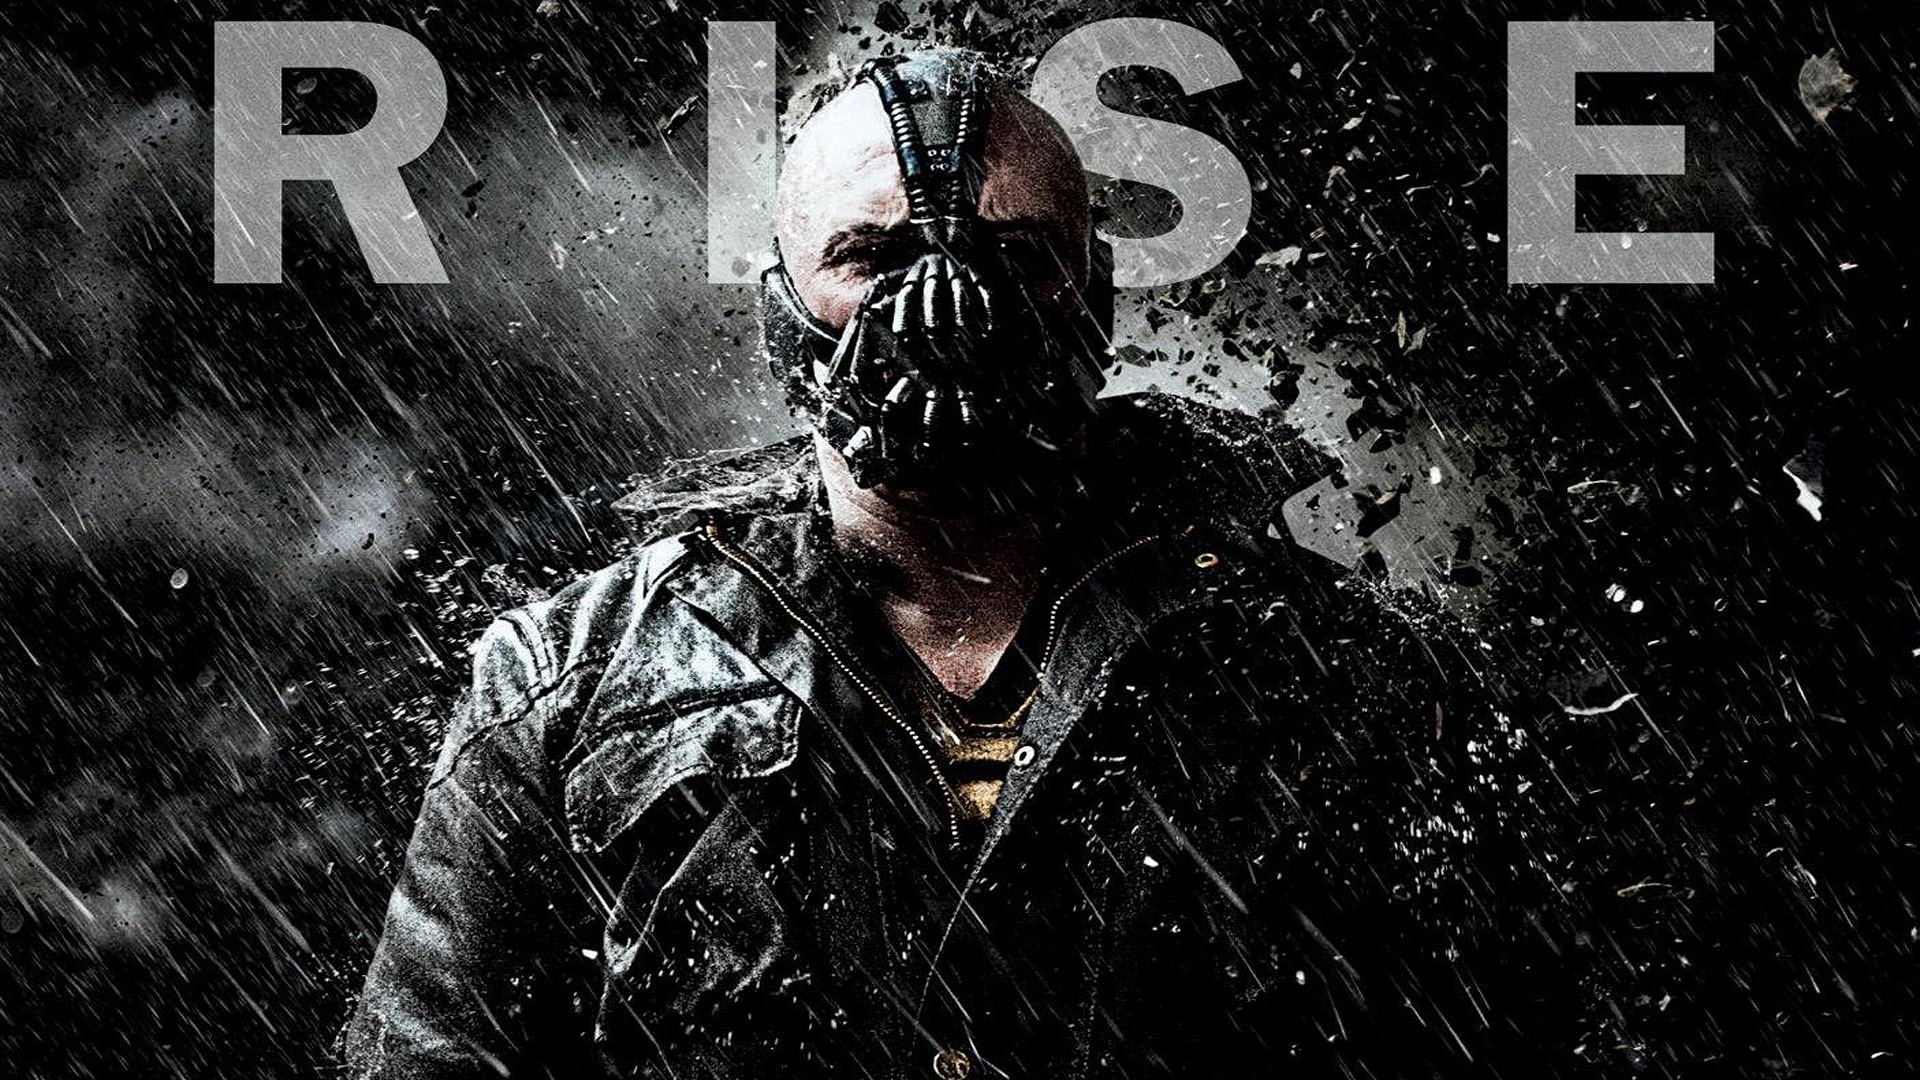 Download 1080p The Dark Knight Rises desktop background ID:161387 for free